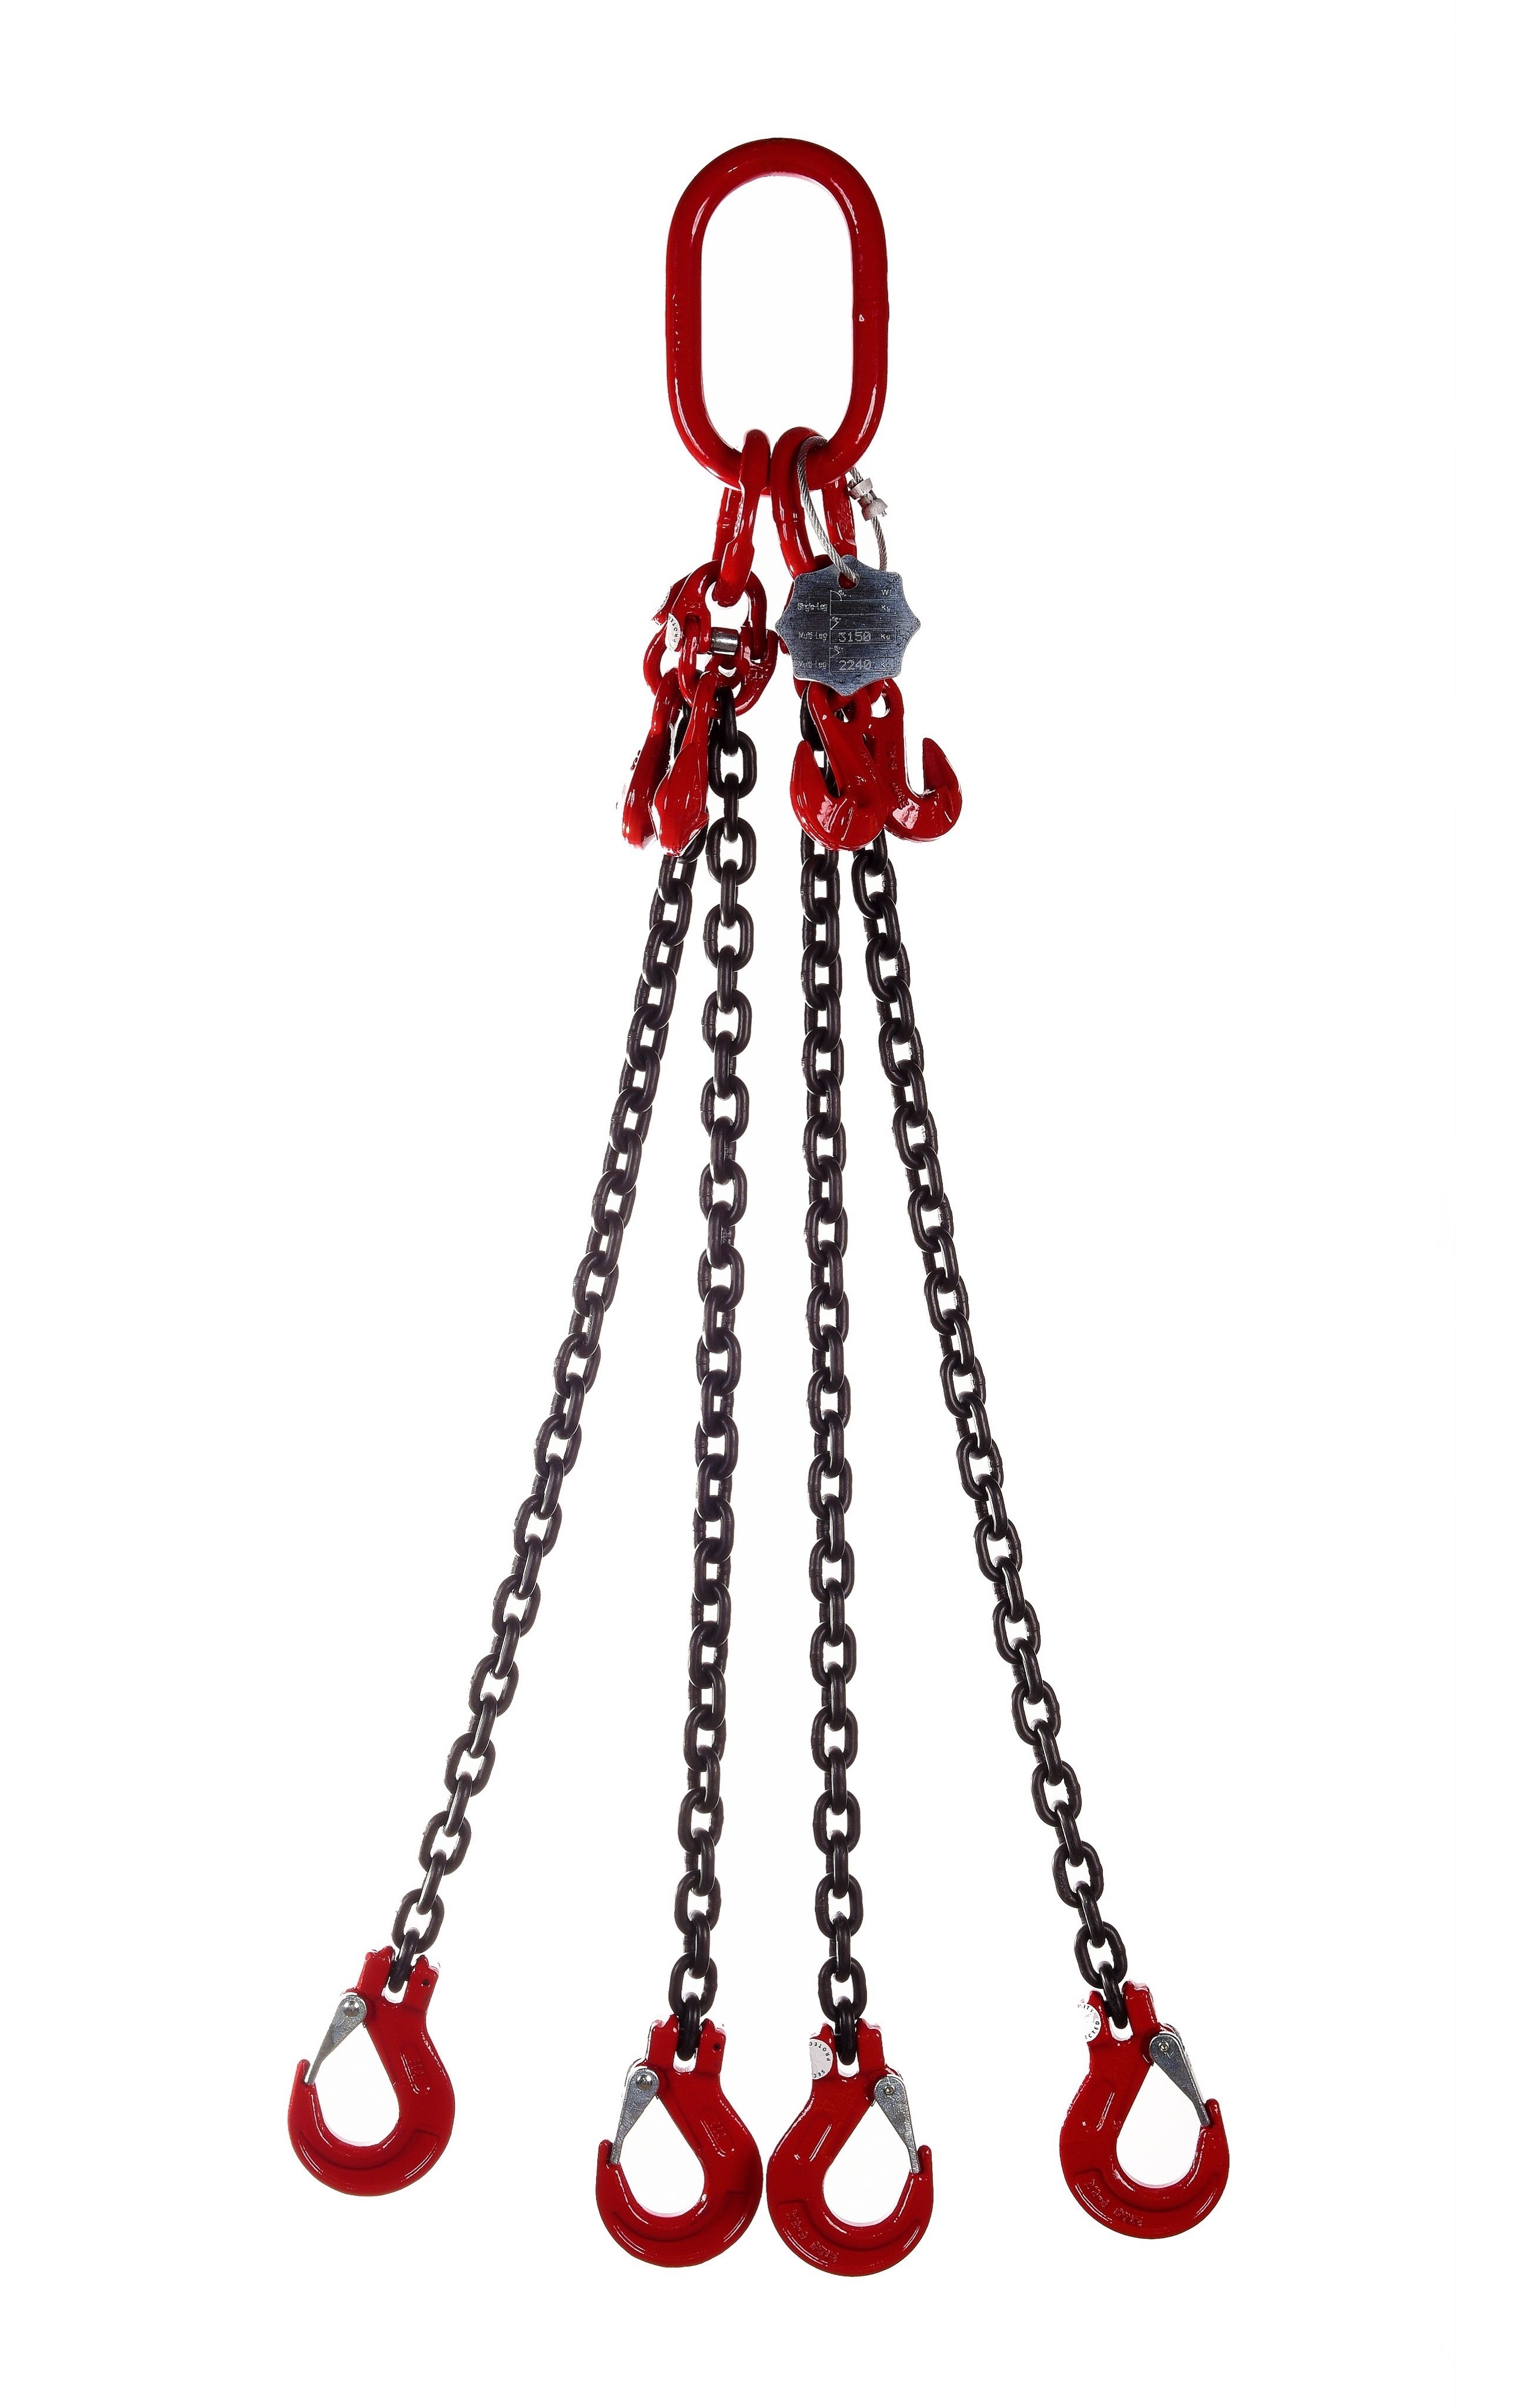 4 Leg 23.6tonne 19mm Lifting Chain Sling with choice of length and hooks – With Shortening Hook – 1mtr – Clevis Sling Hook – Chain Slings – WSB